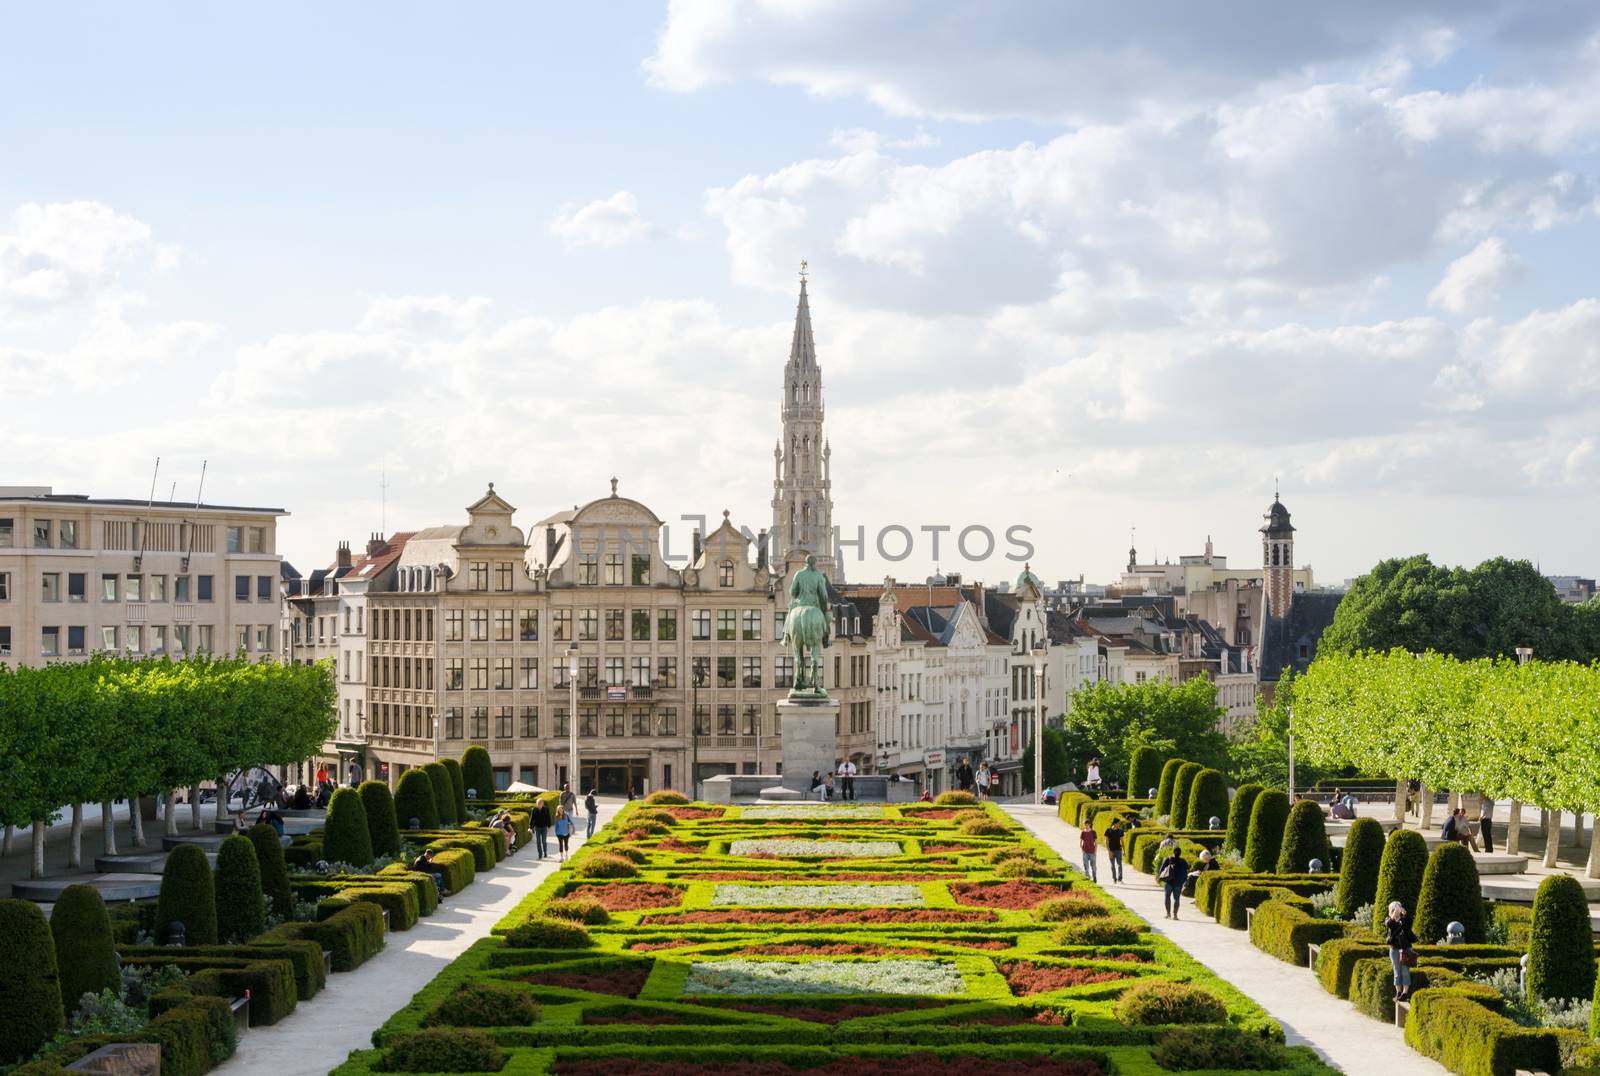 Brussels, Belgium - May 12, 2015: Tourist visit Kunstberg or Mont des Arts (Mount of the arts) gardens in Brussels, by siraanamwong